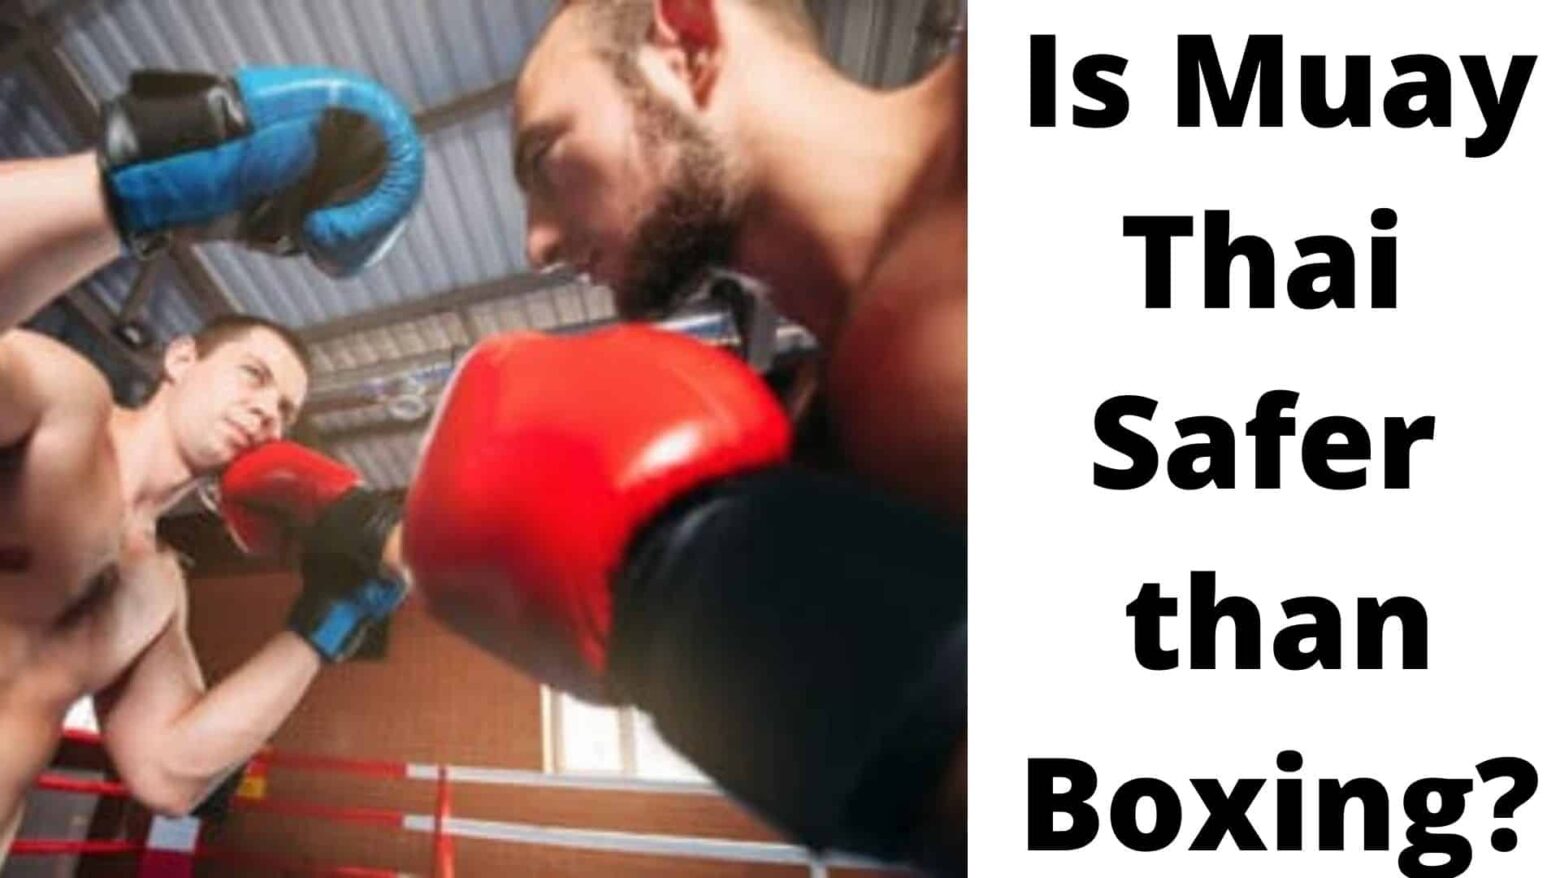 Is Muay Thai safer than boxing?